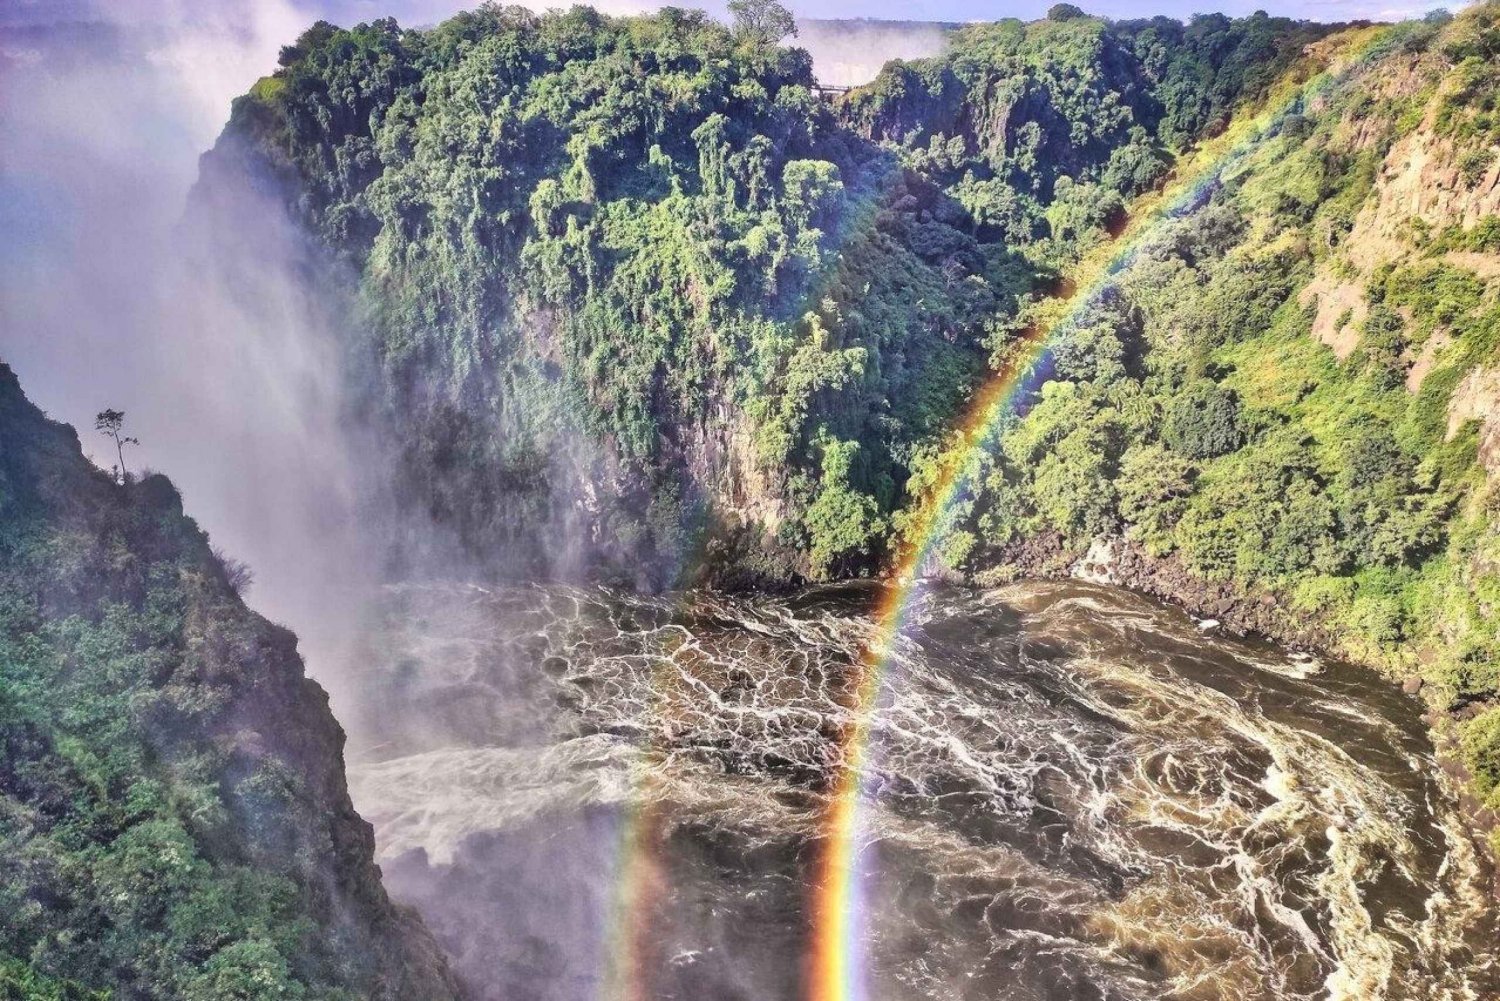 Victoria Falls: Guided Tour of the mighty Falls